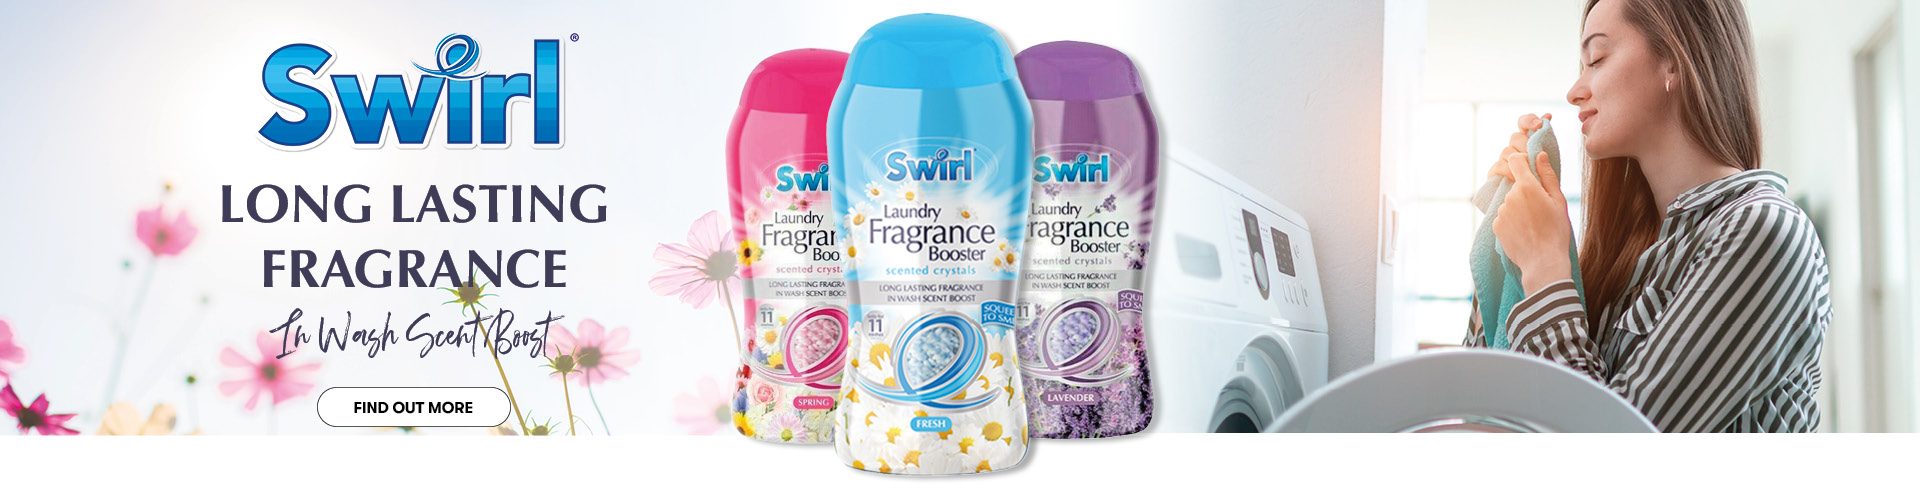 Swirl products